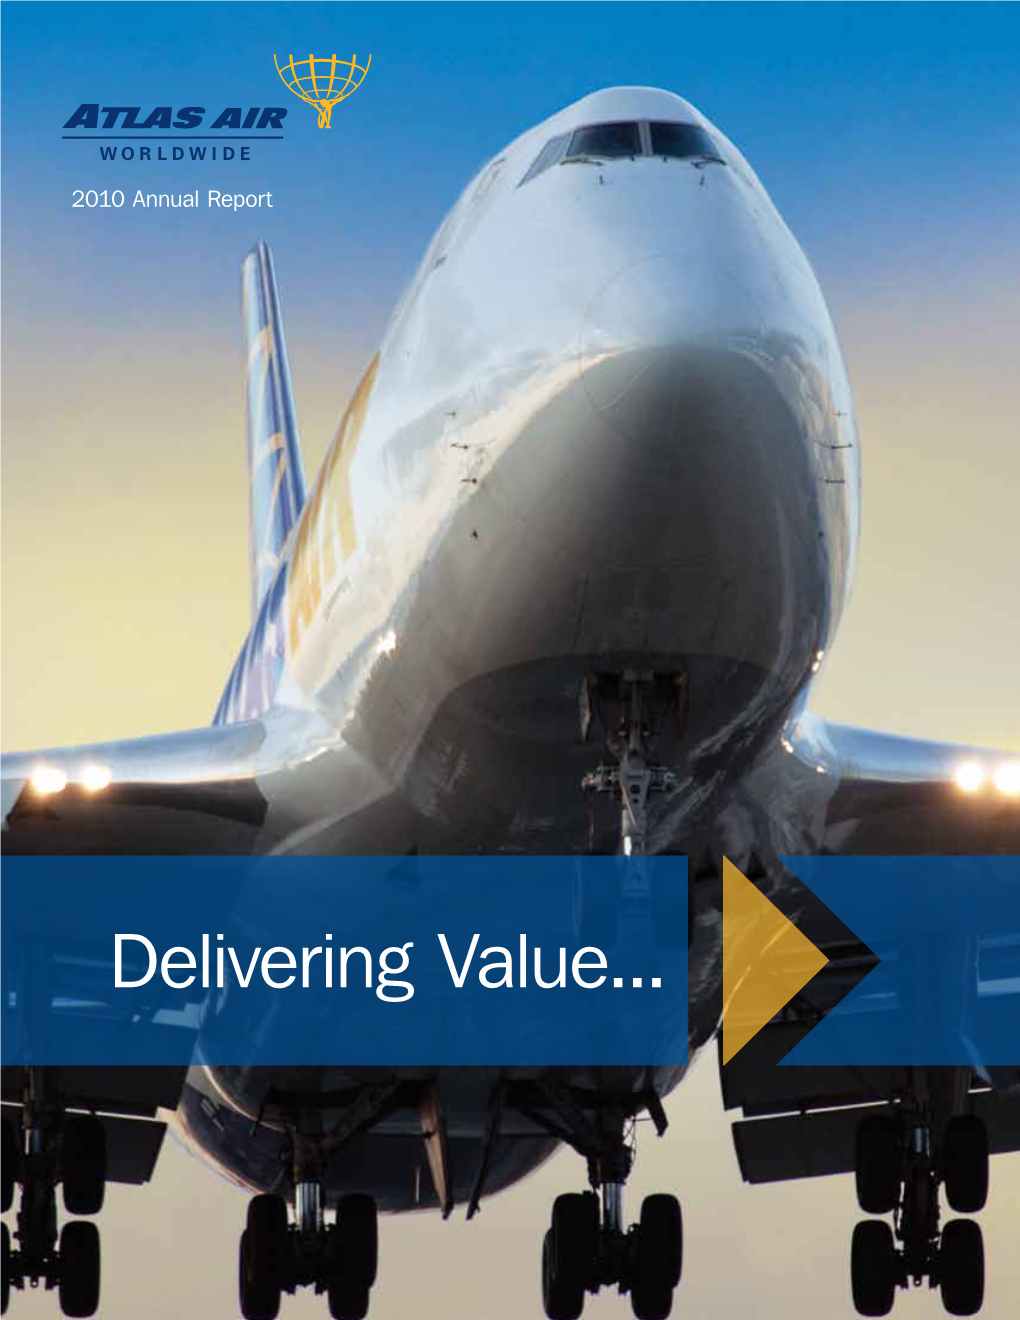 Delivering Value... About Atlas Air Worldwide Investment Highlights